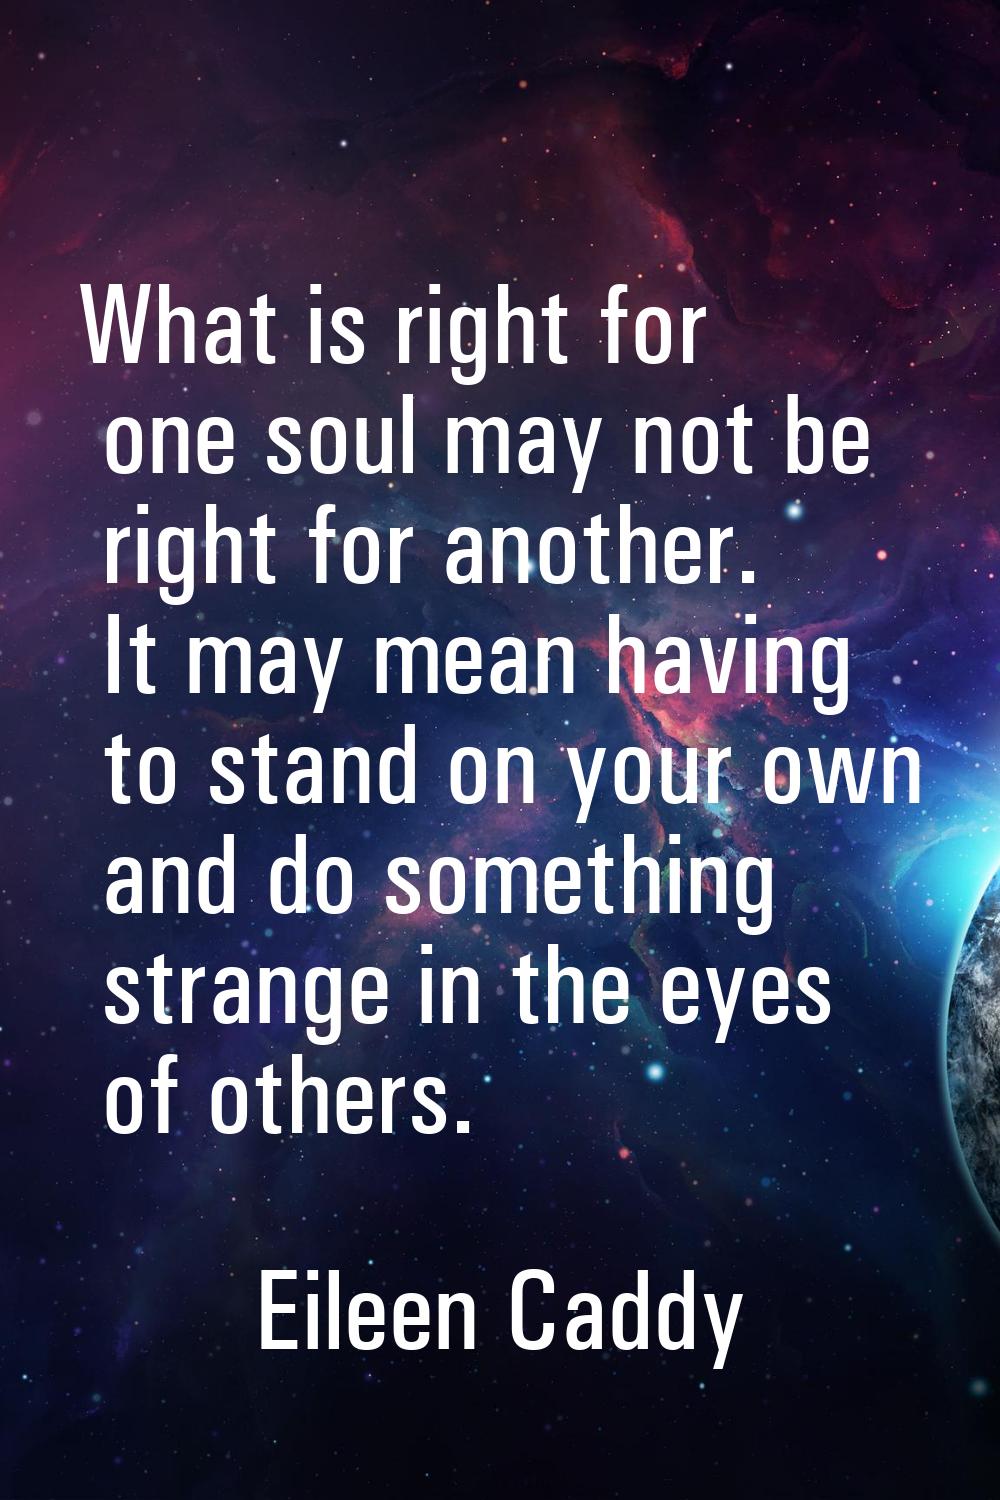 What is right for one soul may not be right for another. It may mean having to stand on your own an